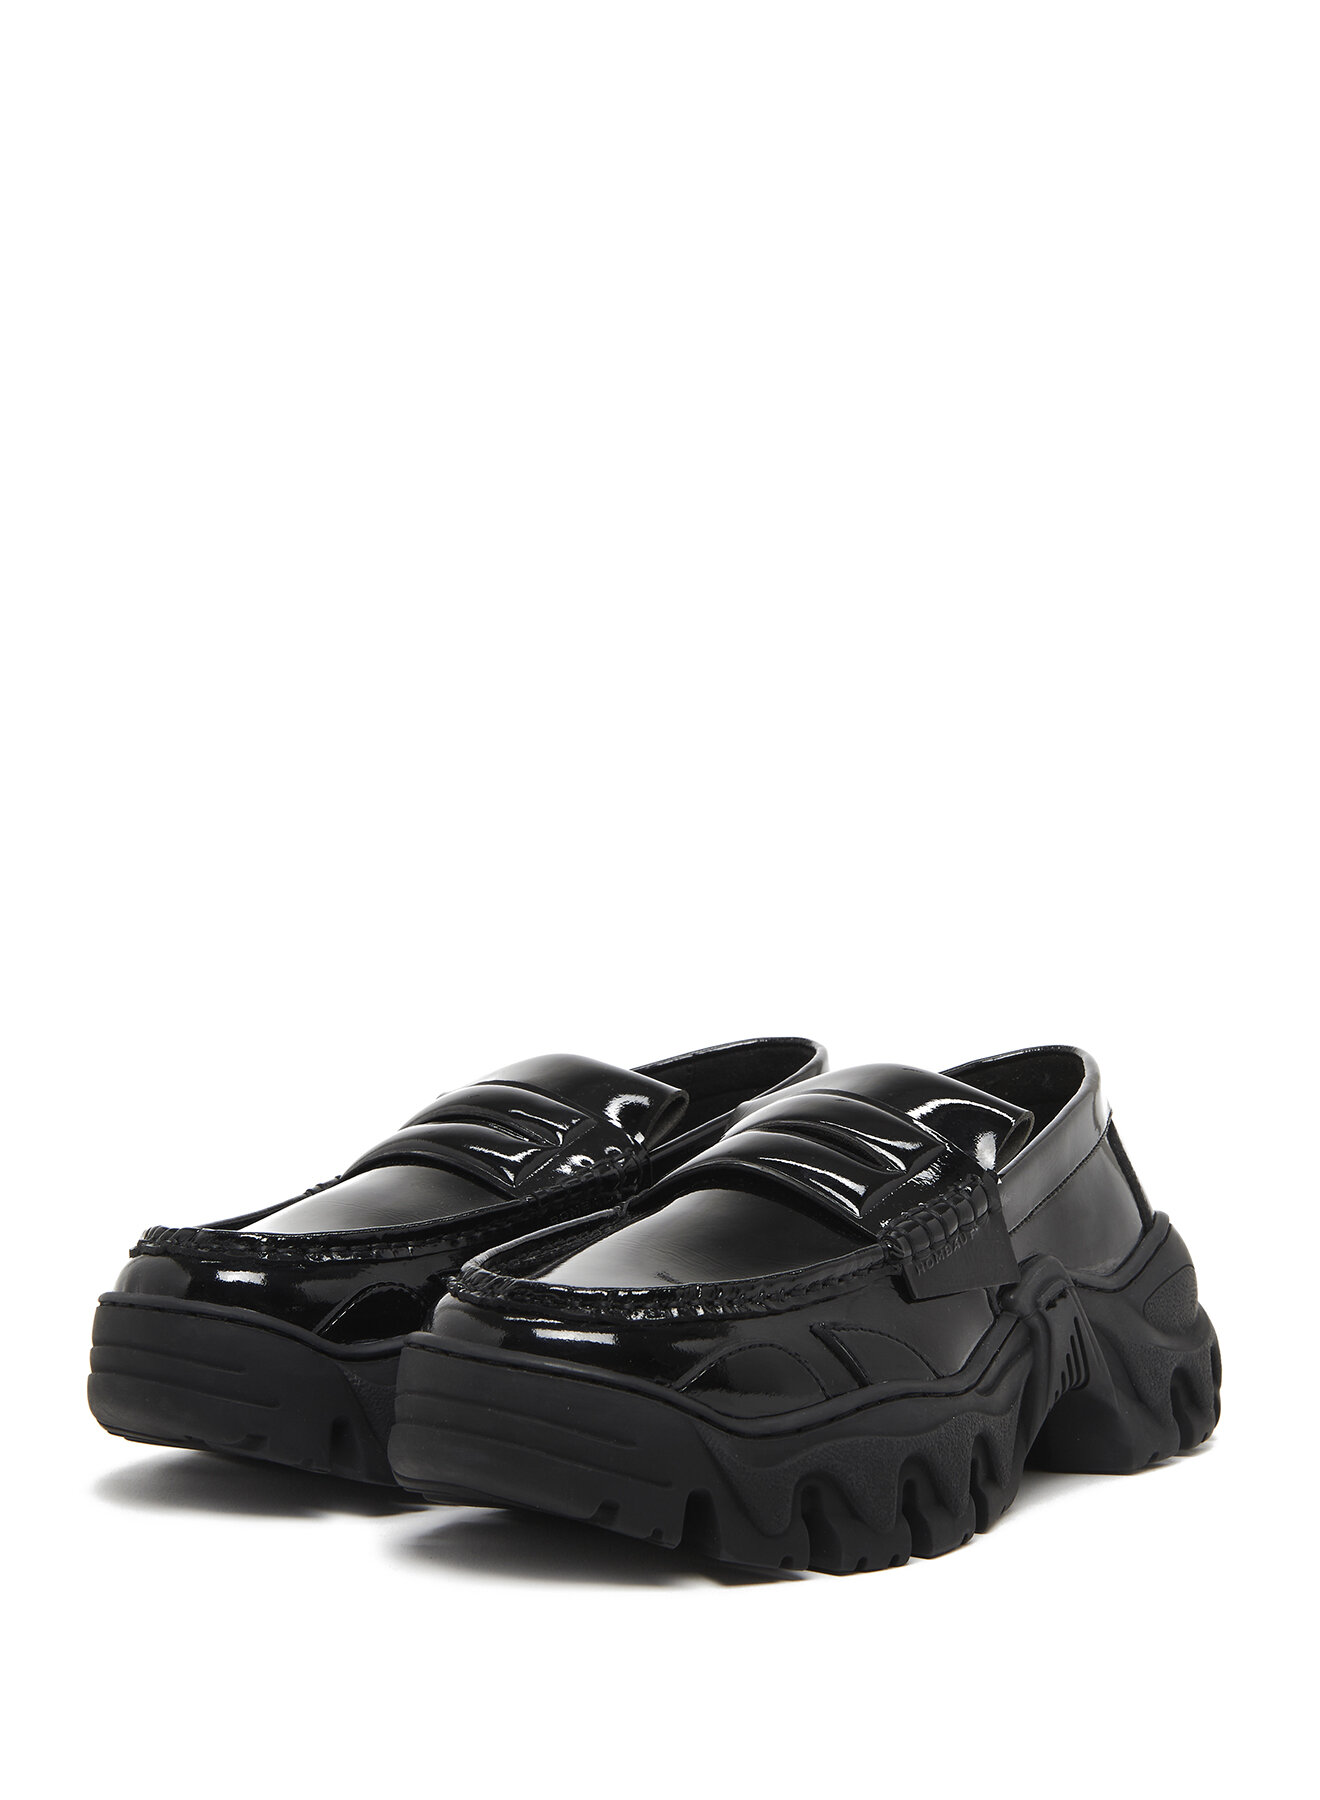 BOCCACCIO II PADDED LOAFER PATENT BLACK_FRONT.jpg